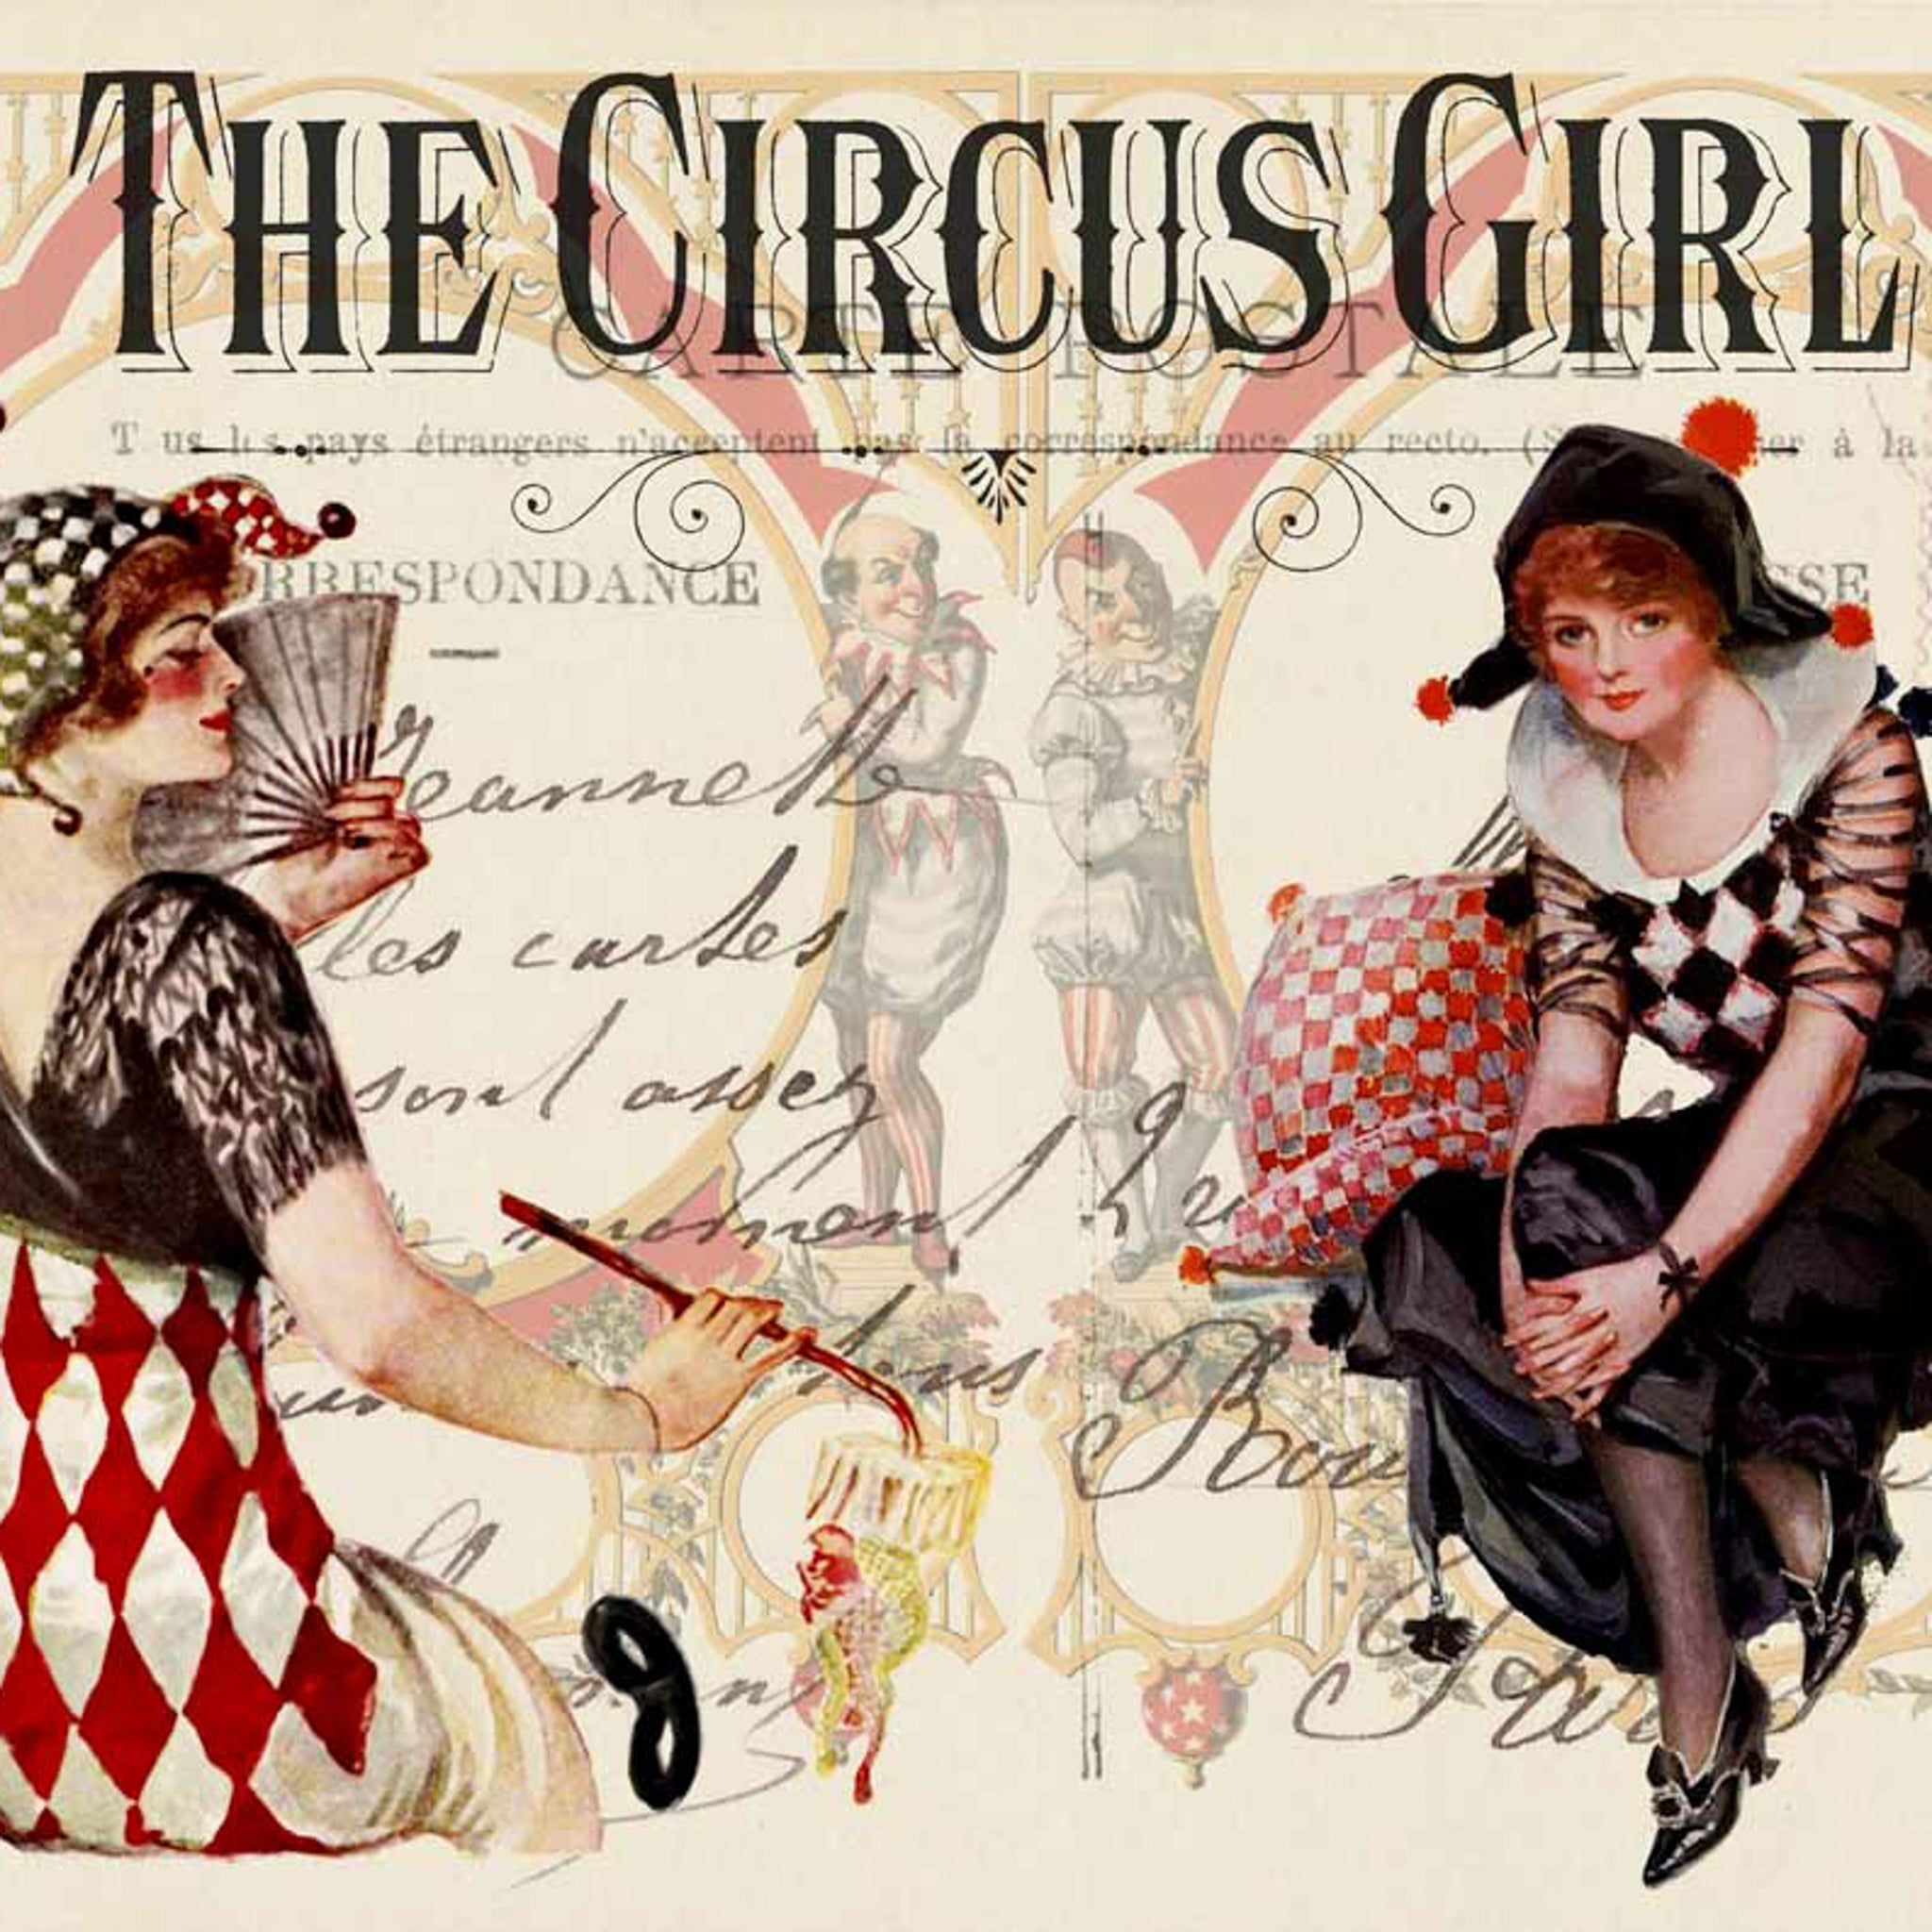 A2 rice paper design of a vintage circus poster that features women in harlequin costumes.